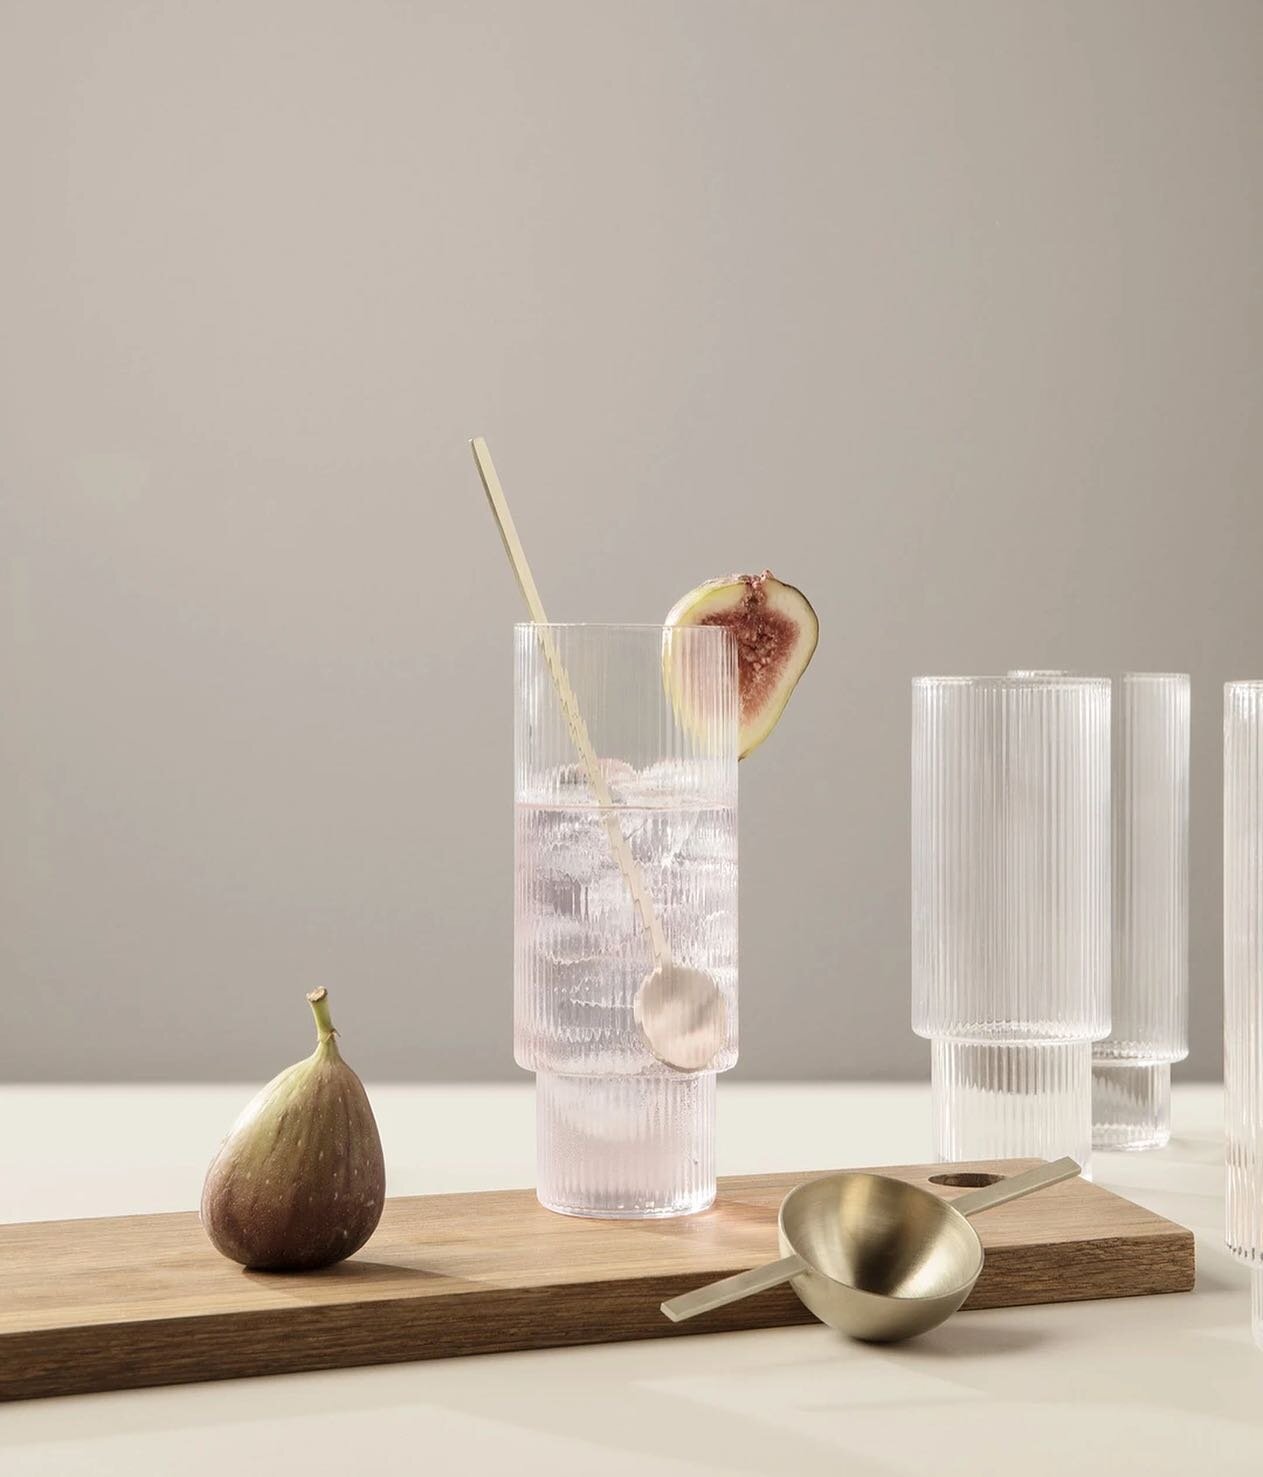 Inspiration. Summer vibes and sophisticated neutral aesthetics&hellip; ✨ Ripple long drink glasses by @fermliving, made in the Northeast of Beijing glass factory, in the Shanxi Province&hellip; 
.
.
📷 @fermliving via @ellefr
.
.
#fermliving #inspira